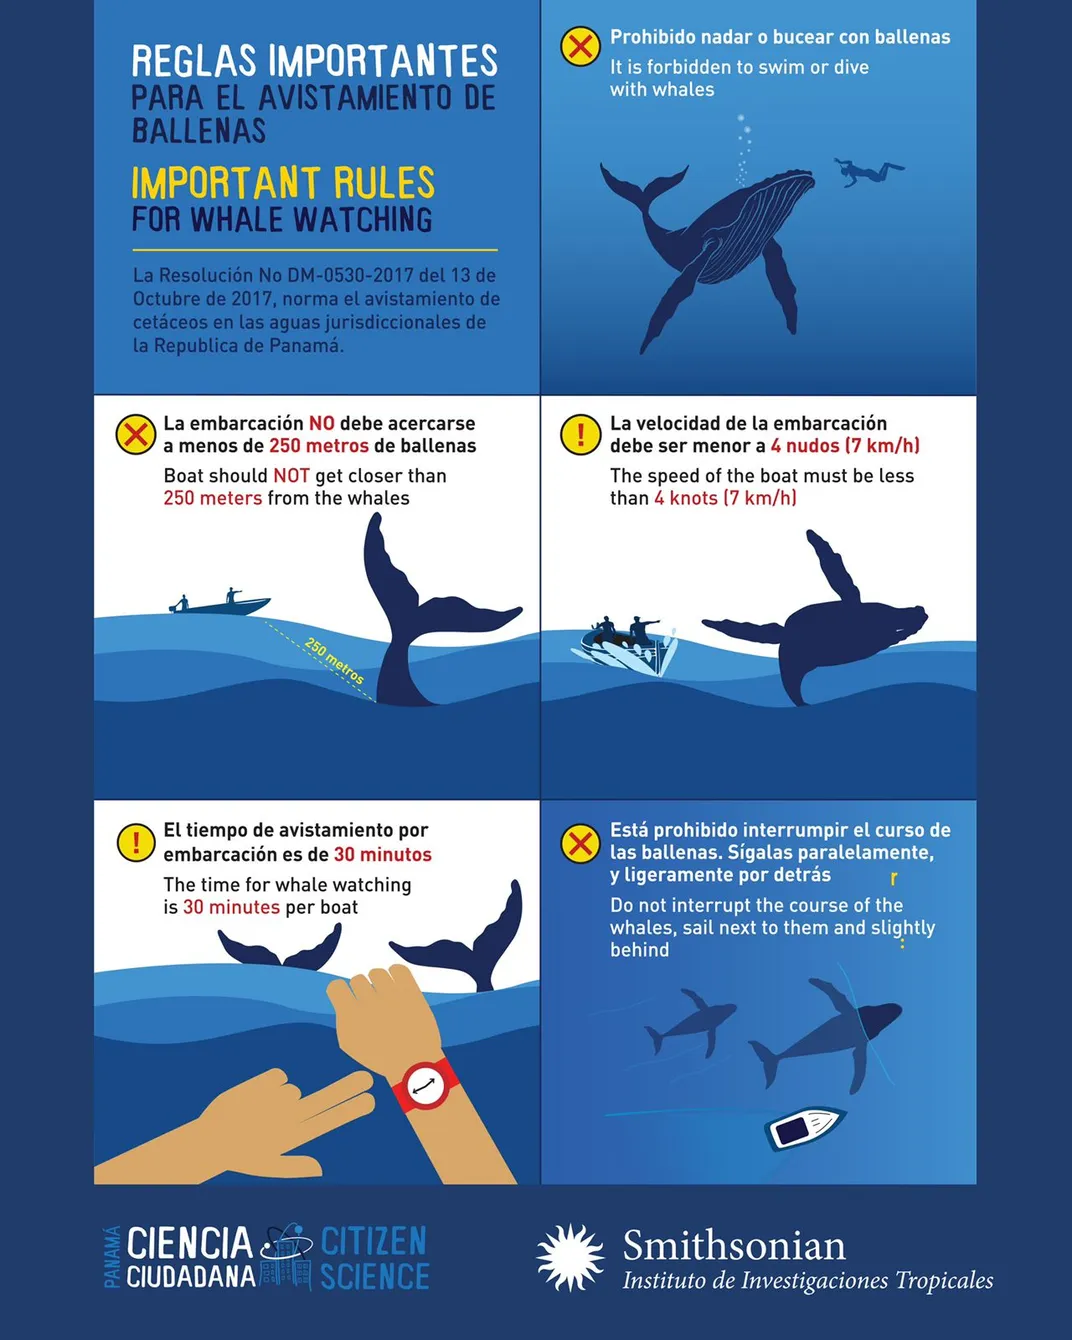 STRI's guidelines for Whale Watching